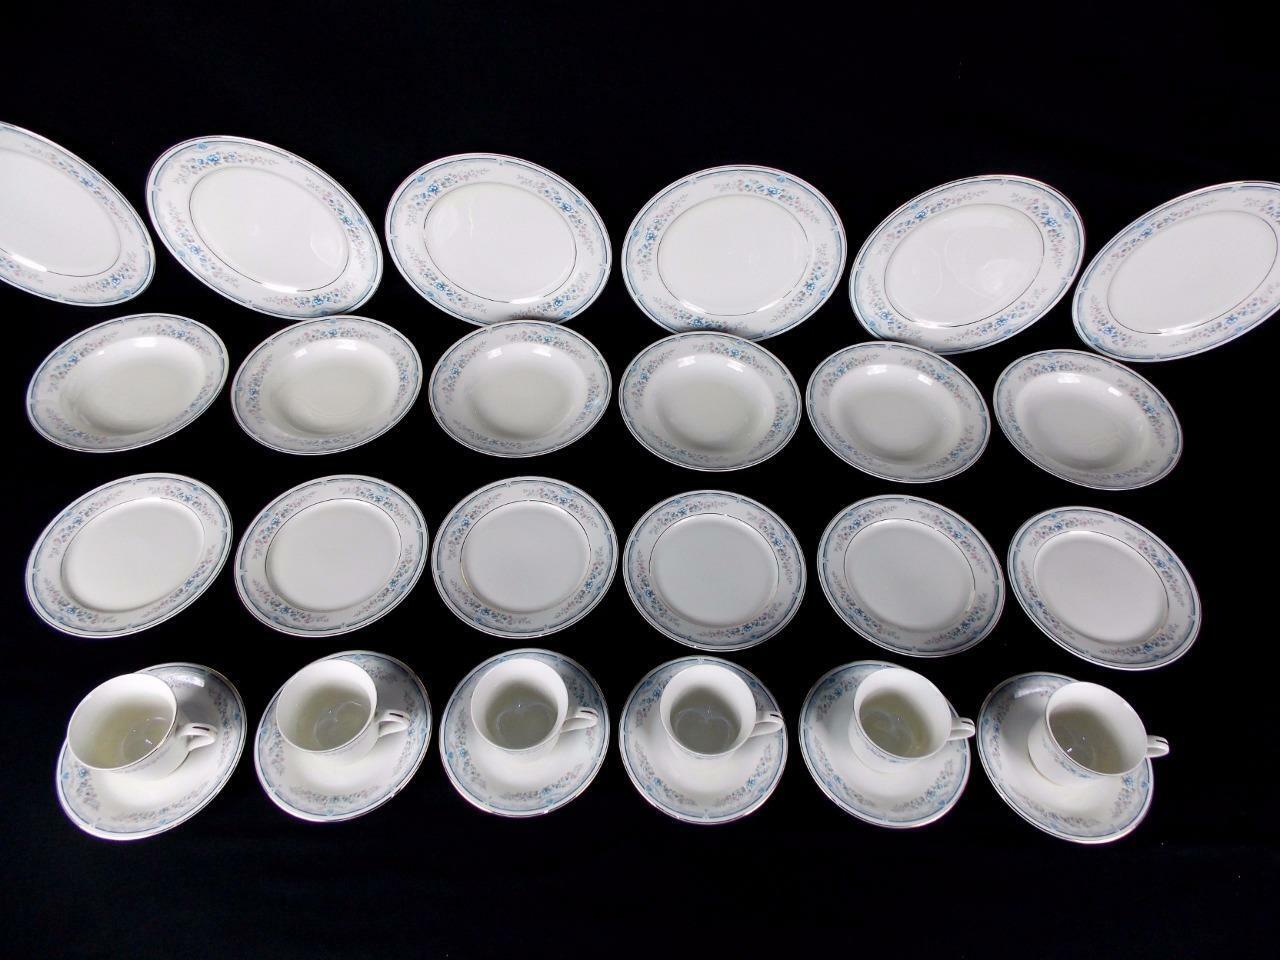 REDUCED  6 FIVE PIECE PLACE SETTINGS ROYAL LIMITED SEASCAPE PLATES BOWLS CUPS